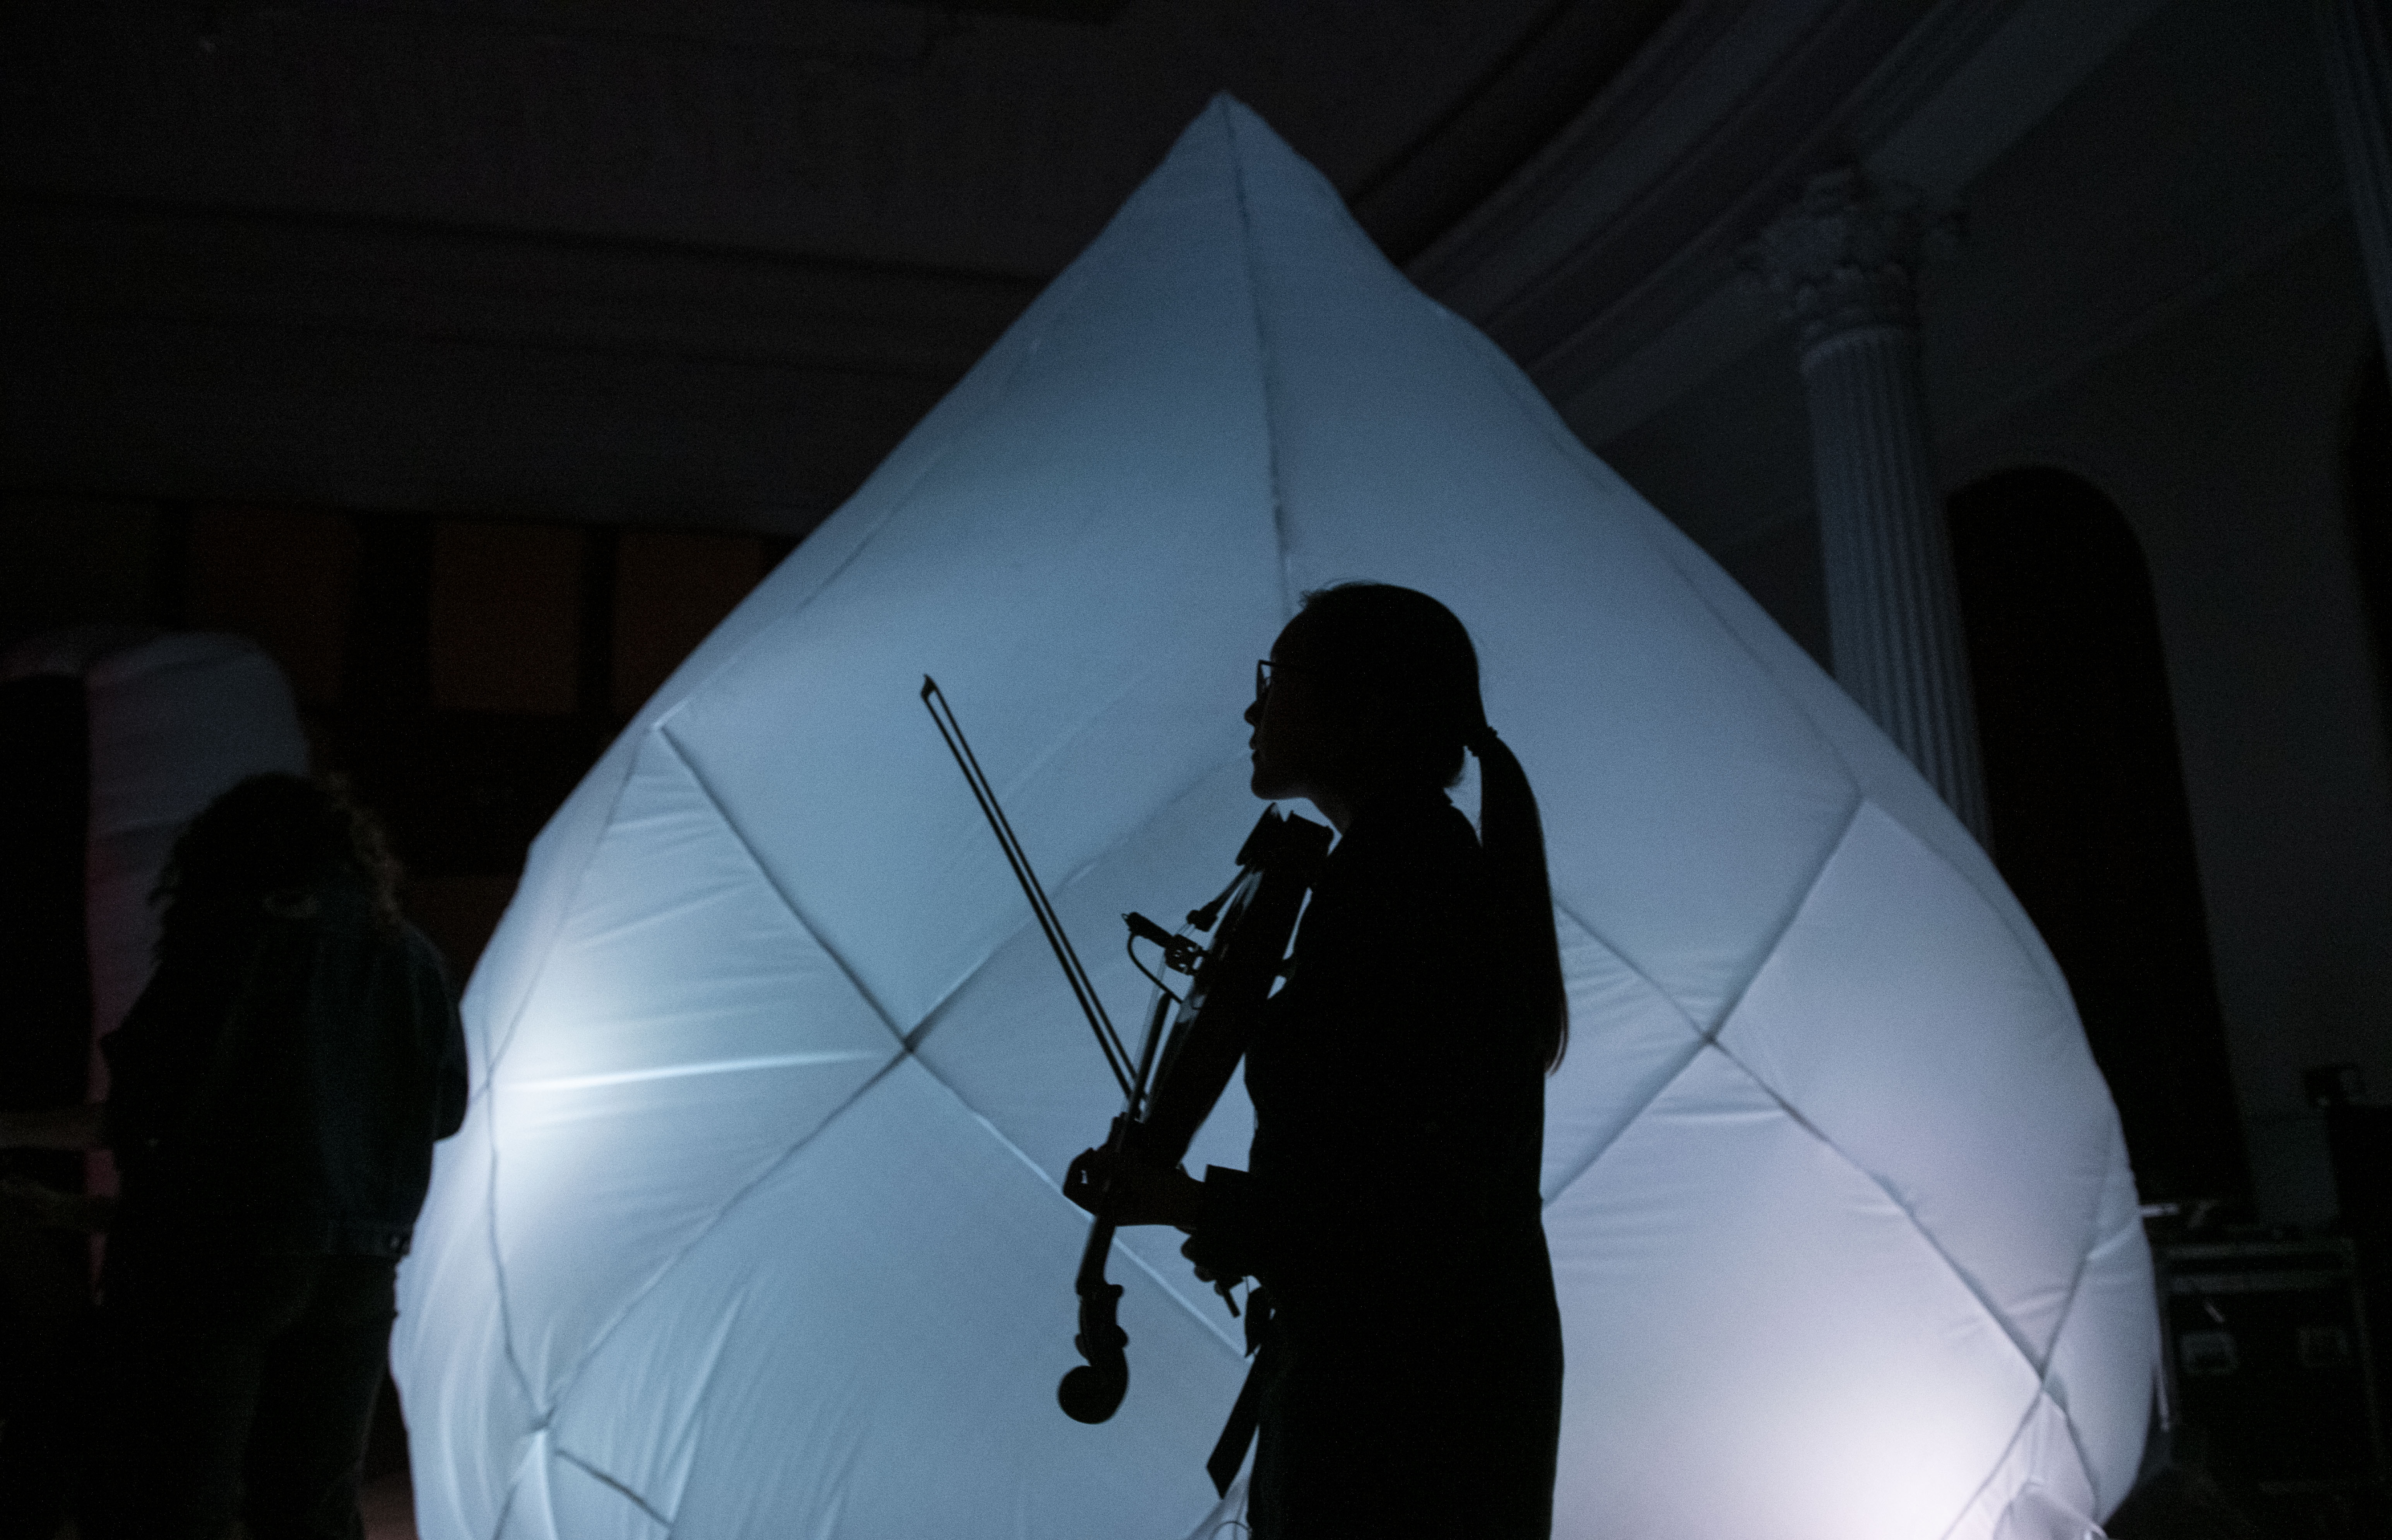 Student playing violin in front of inflatable sculpture